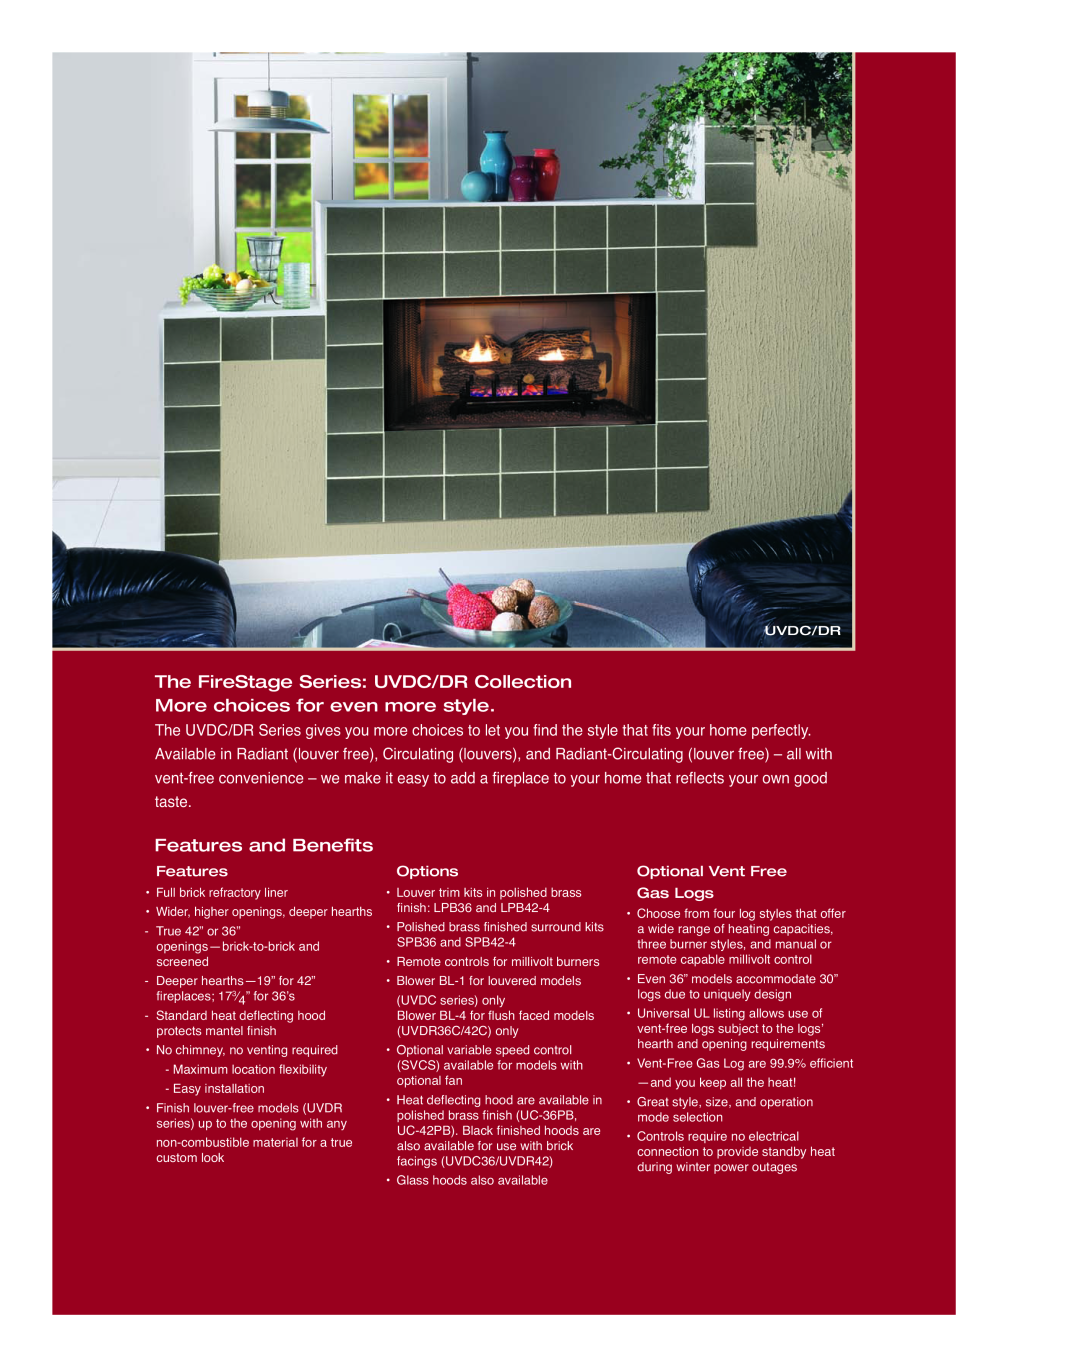 Majestic Appliances manual The FireStage Series UVDC/DR Collection, More choices for even more style, Uvdc/Dr, Features 